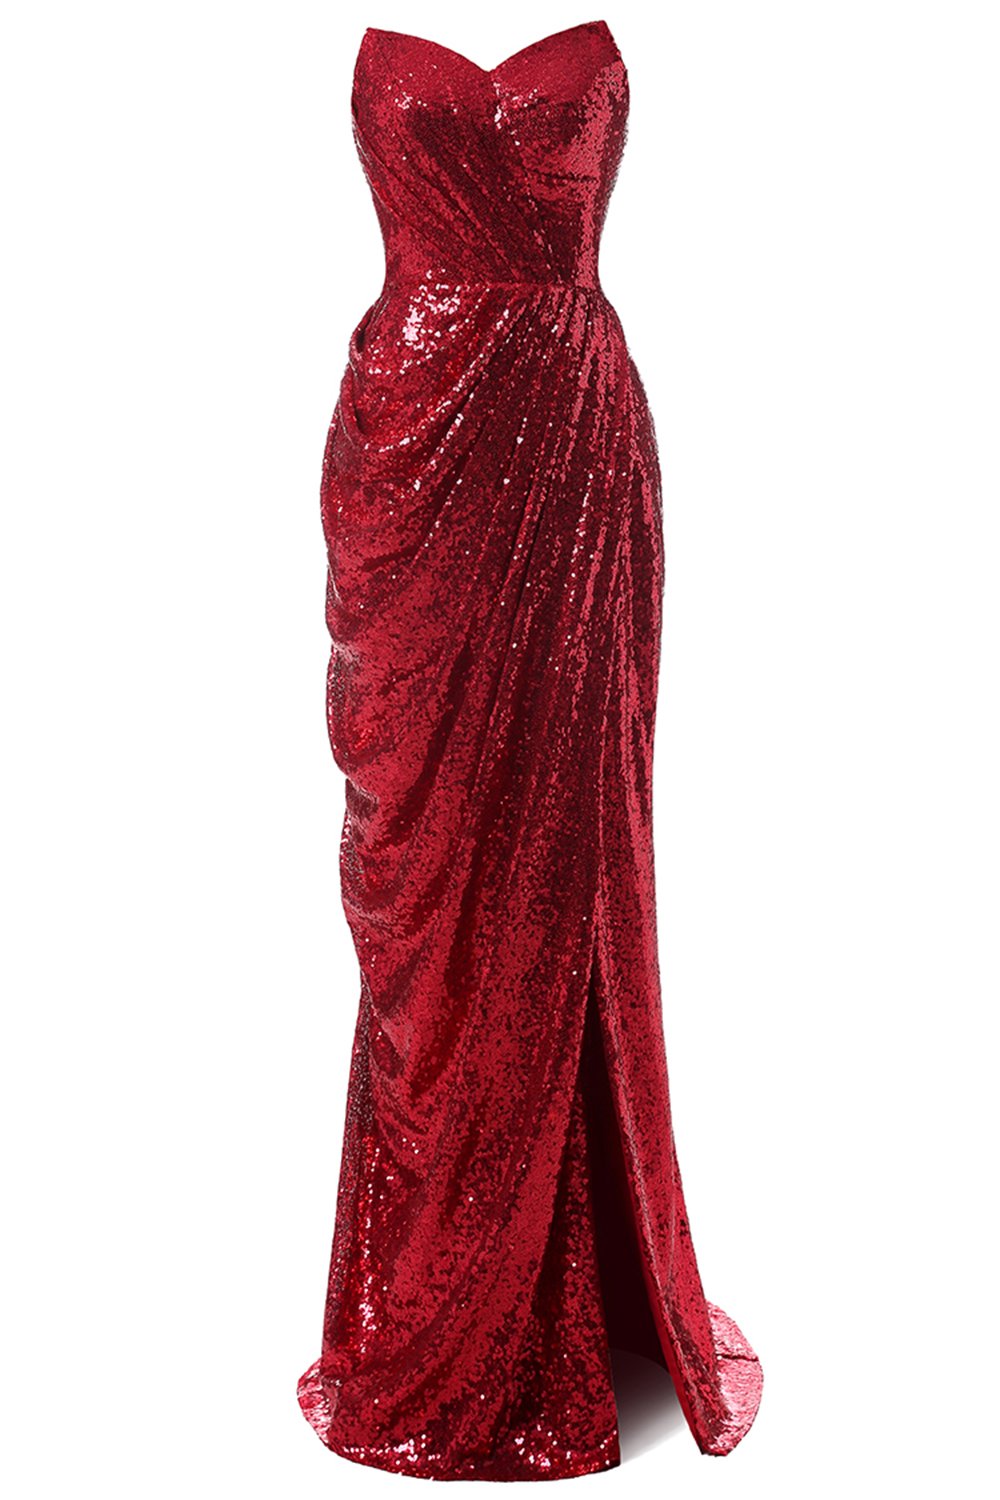 Red Mermaid Sequin Prom Dress